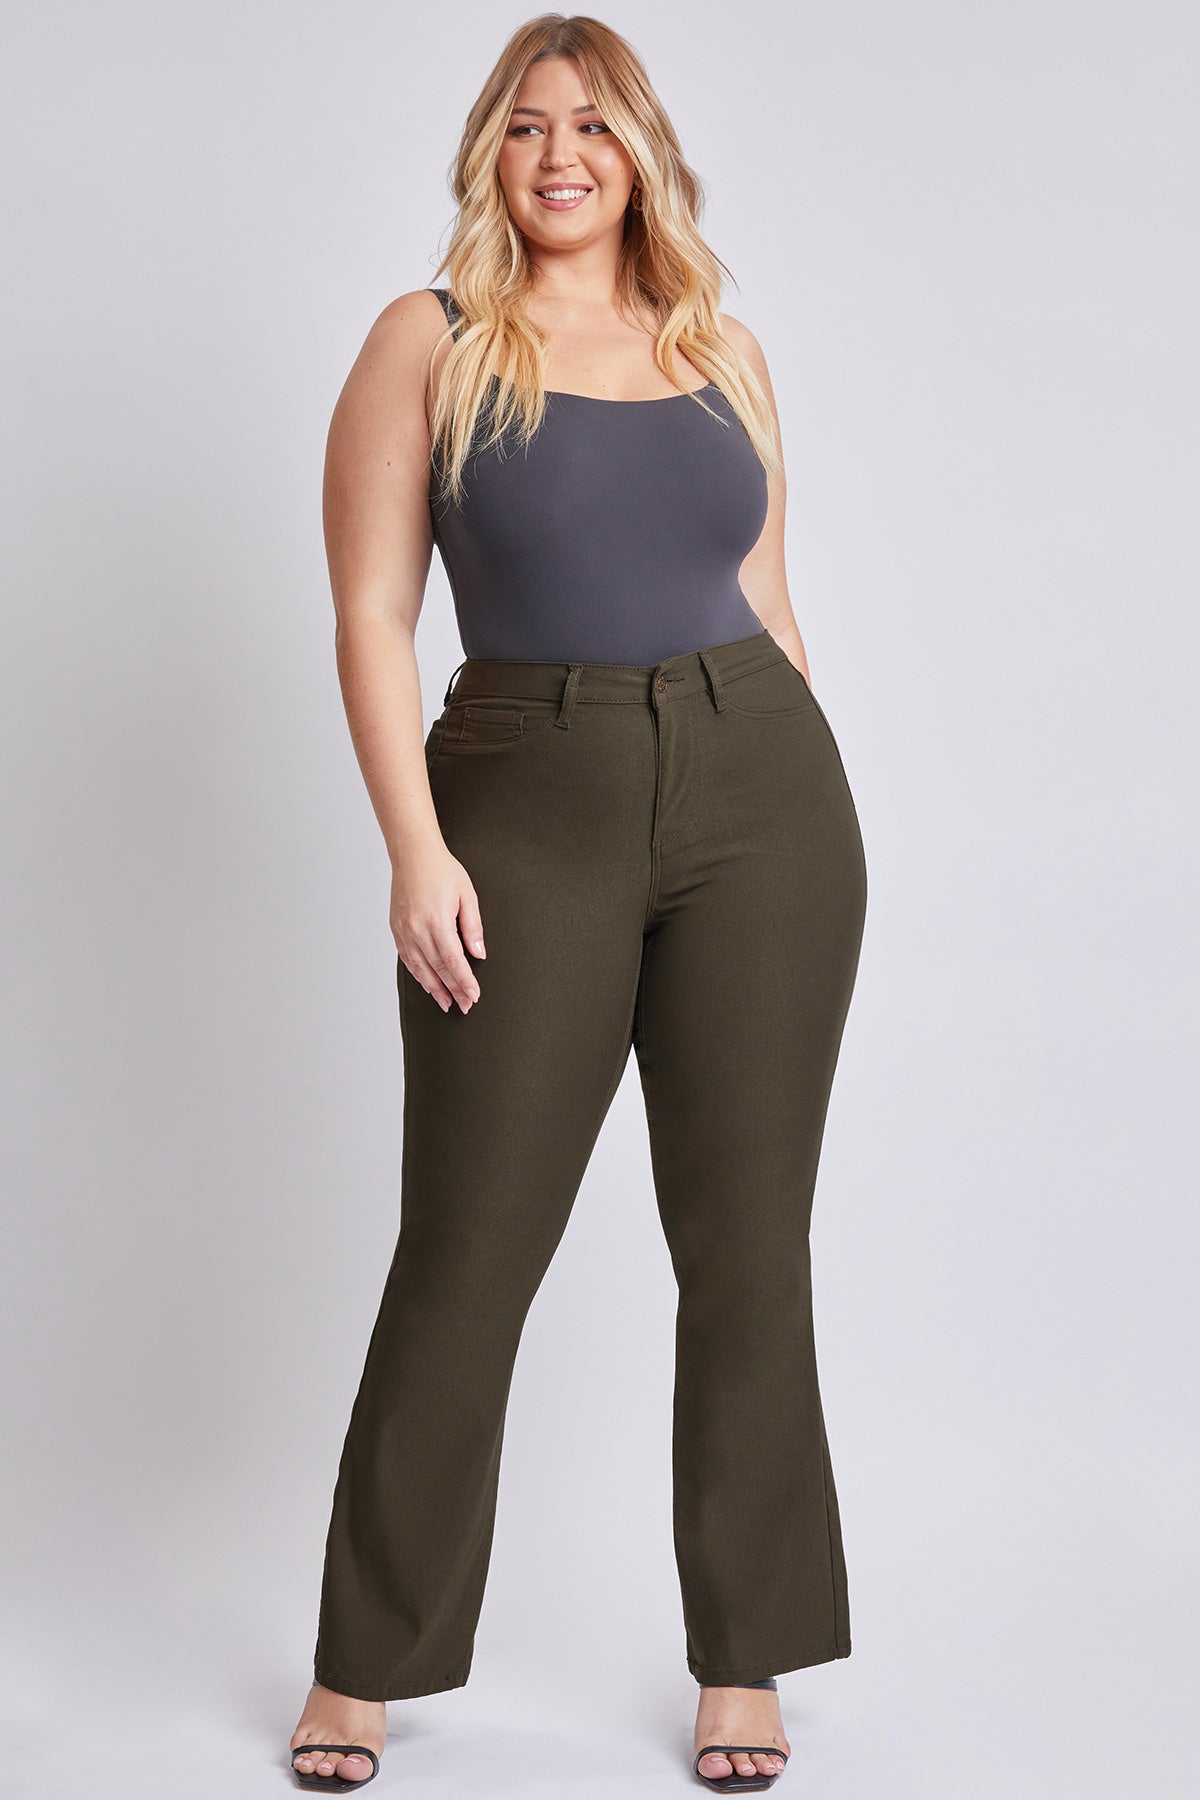 Junior Plus Size Hyperstretch Basic High-Rise Flare 6 Pack